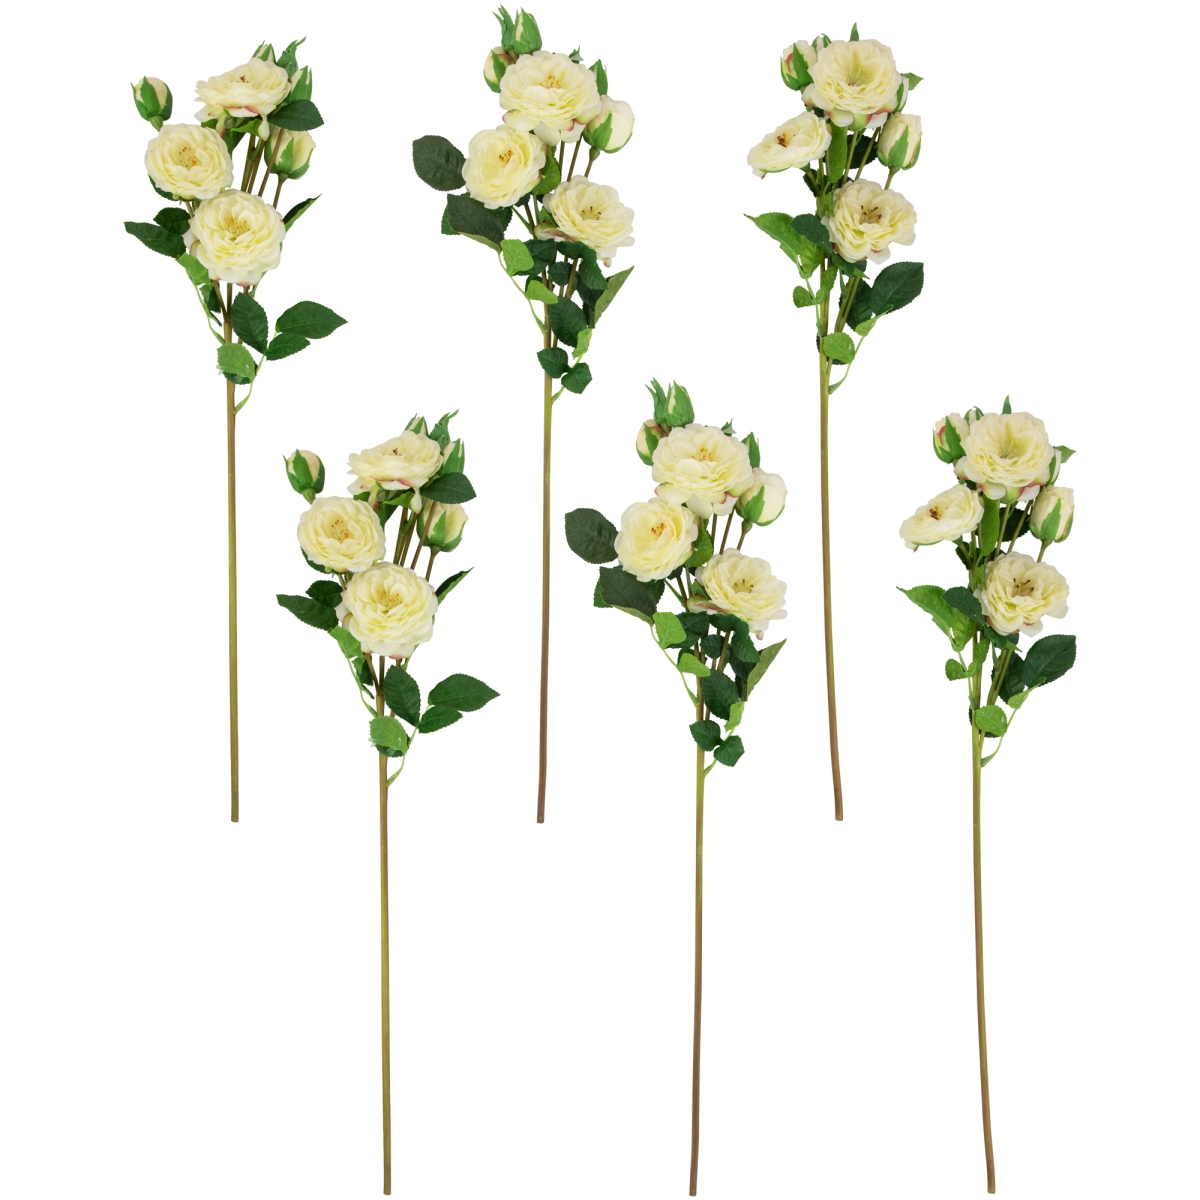 Picture of Northlight 35644480 23 in. Real Touch Camellia Rose Artificial Floral Sprays, White - Set of 6